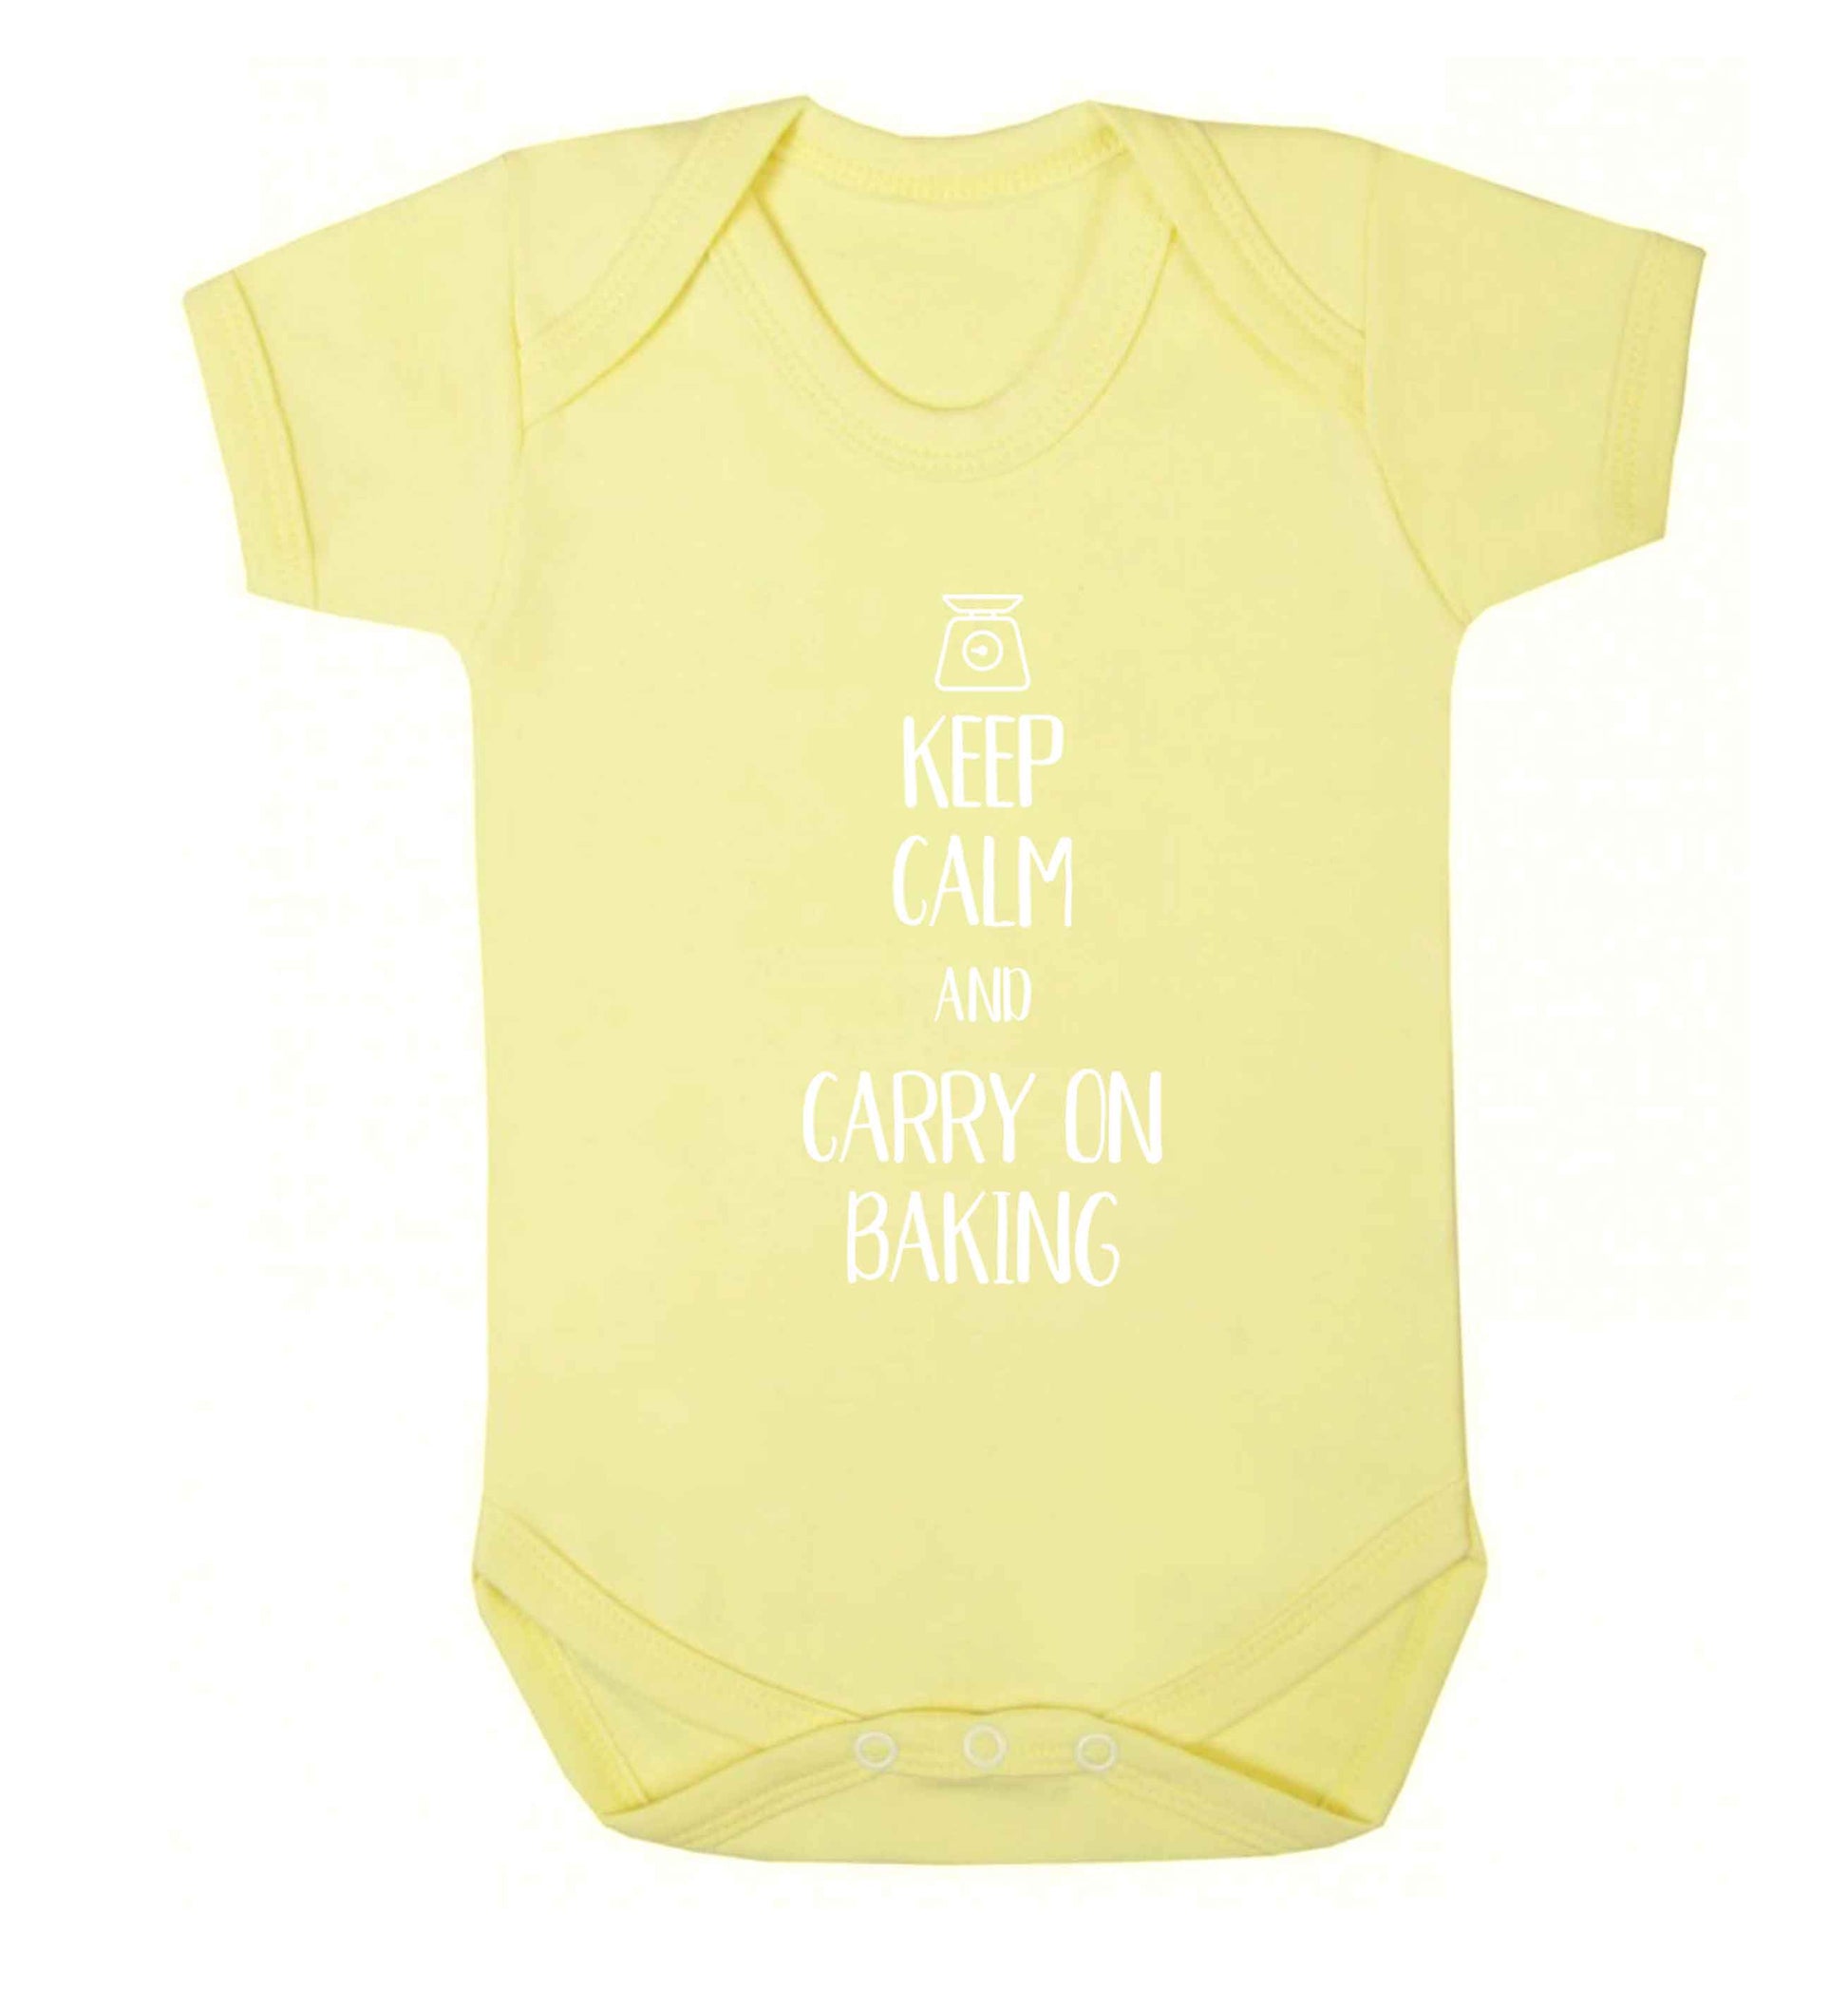 Keep calm and carry on baking Baby Vest pale yellow 18-24 months